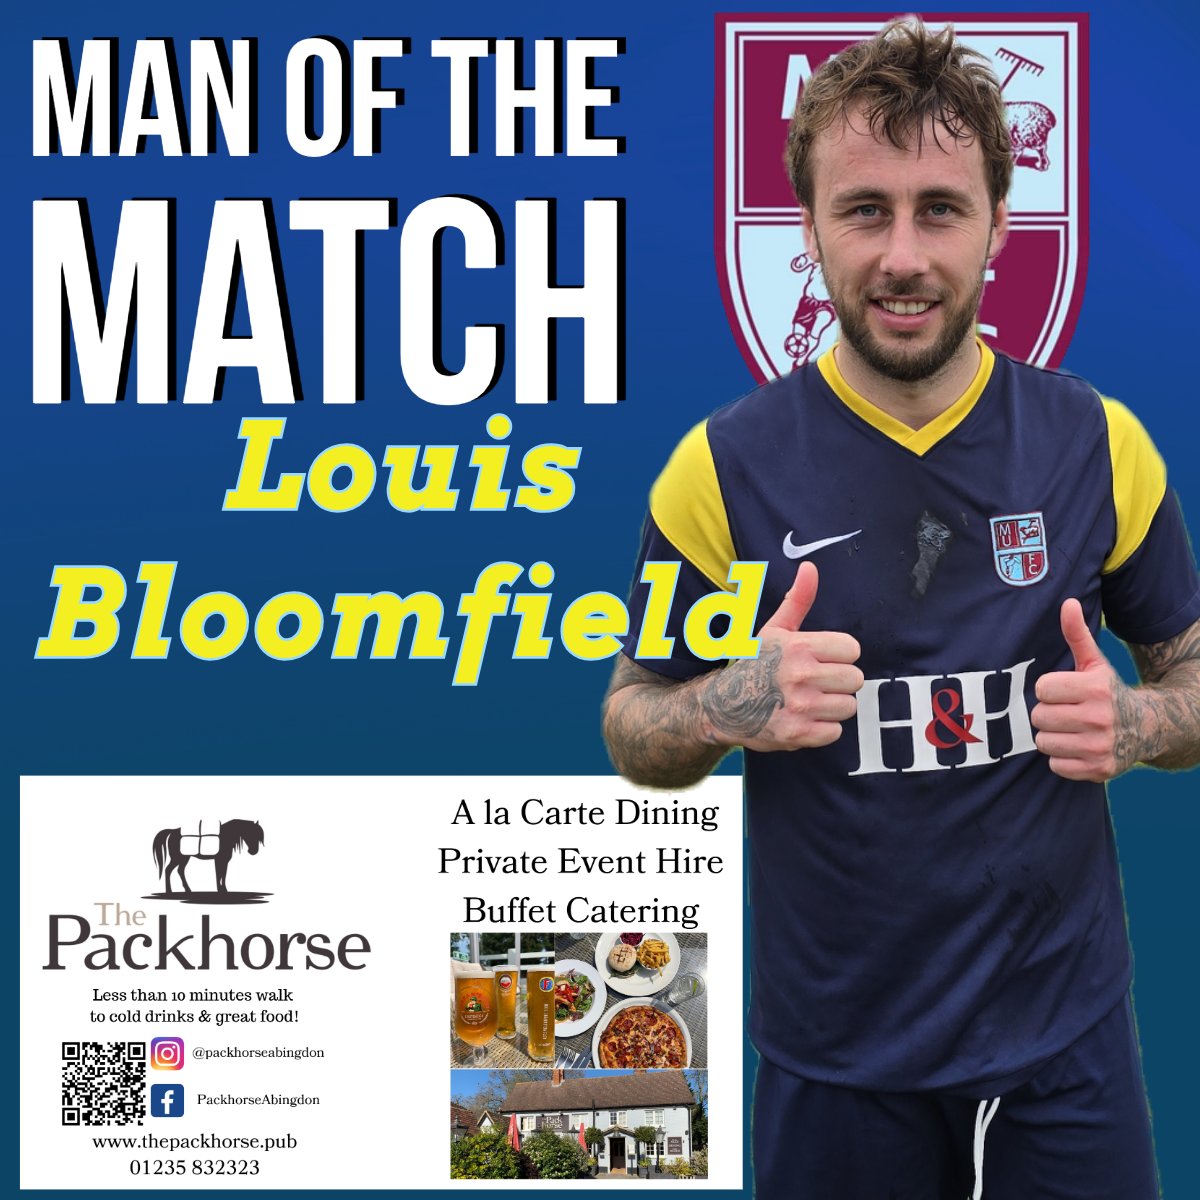 Today's 𝙋𝙖𝙘𝙠𝙝𝙤𝙧𝙨𝙚 𝘼𝙗𝙞𝙣𝙜𝙙𝙤𝙣 Man of the match was @Bloommy95. A big thank you to The PACKHORSE ABINGDON for sponsoring the man of the match award throughout the season 🙌🏻 #UTM